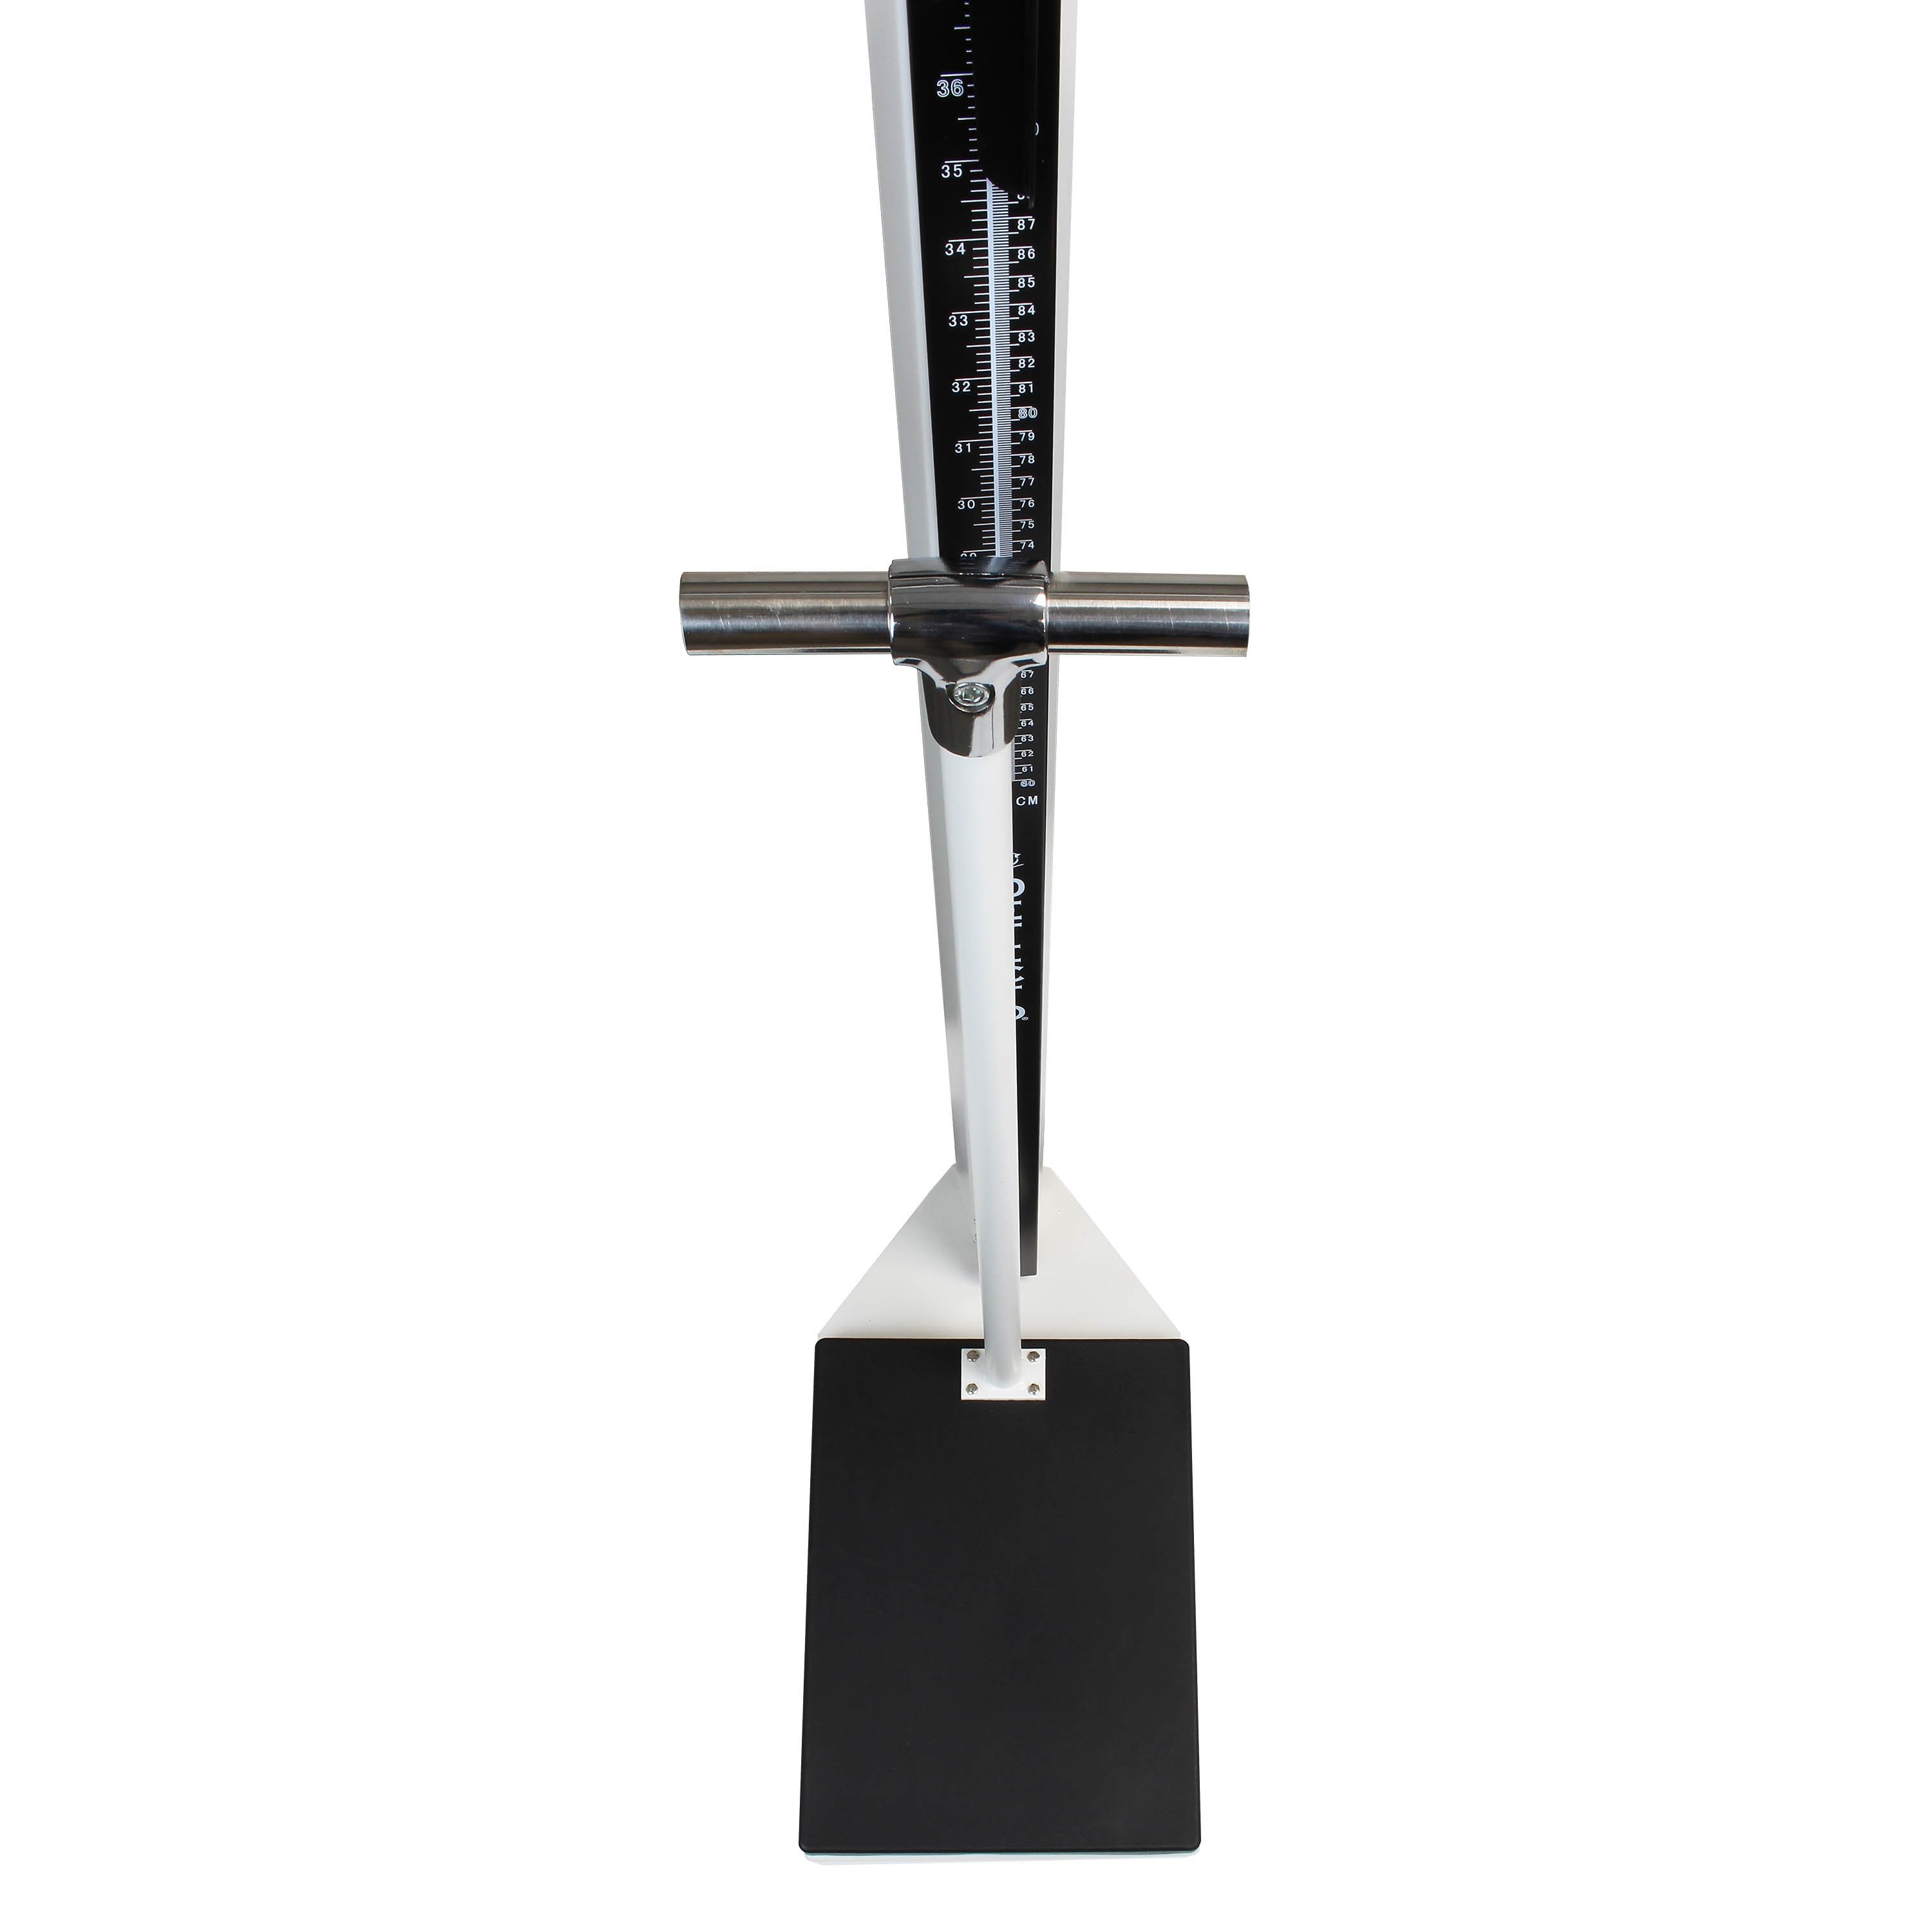 Mechanical Eye-Level Scales - Stainless Steel